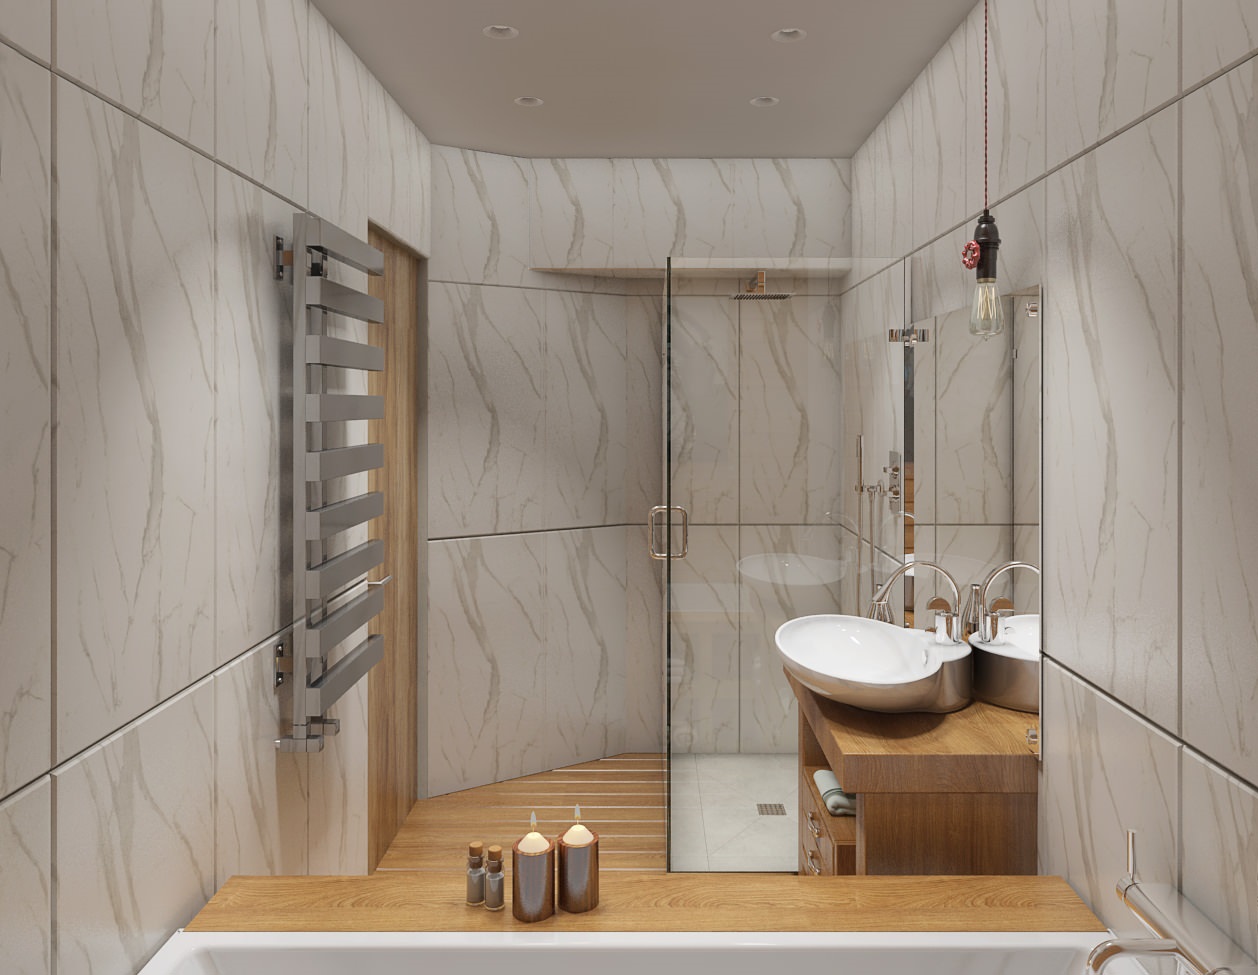 An example of a bright style of a bathroom of 5 sq.m